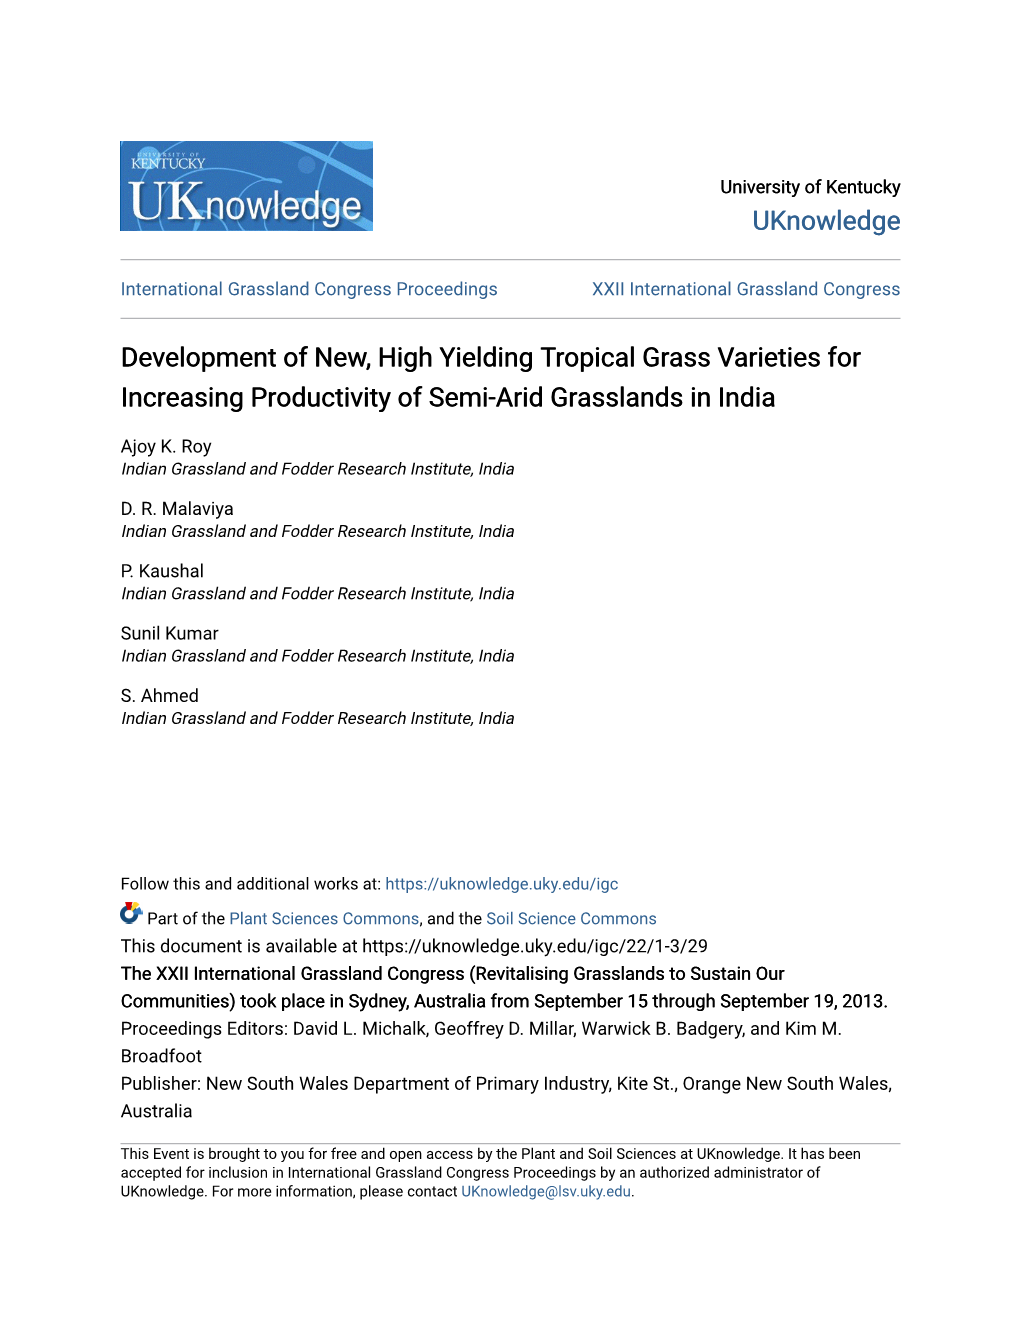 Development of New, High Yielding Tropical Grass Varieties for Increasing Productivity of Semi-Arid Grasslands in India